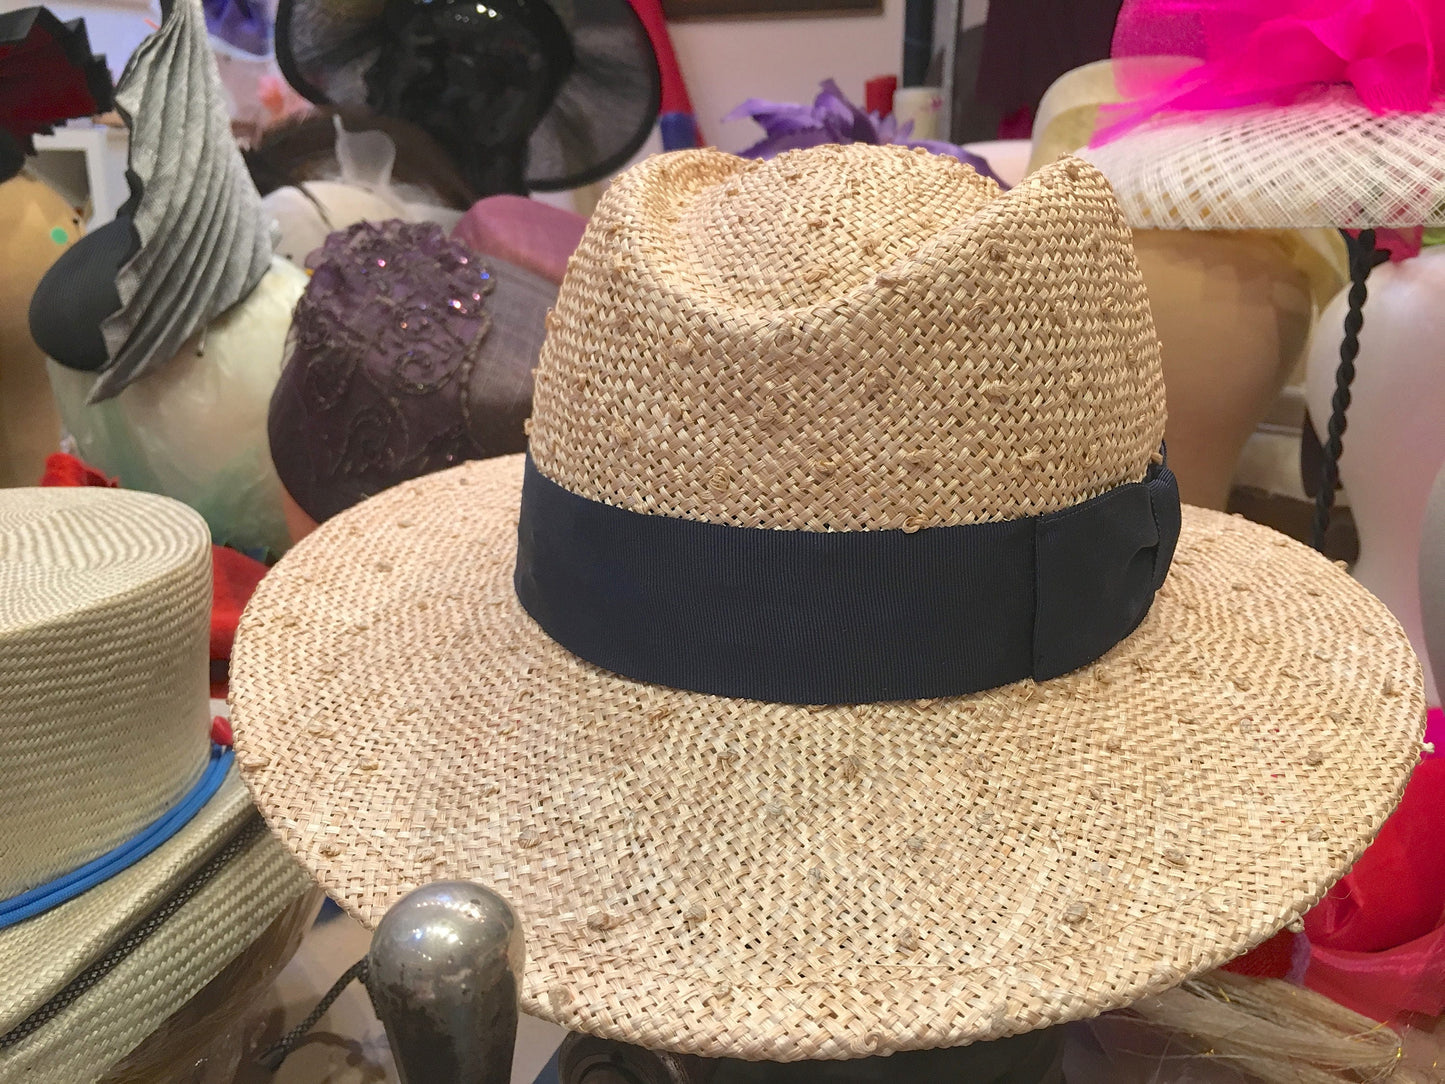 UNISEX FEDORA Knotted Straw Hat- Perfect for a man or a woman- Customize band color-Beach Hat-Sun Hat- Great Gift! Mens Fedora- Race Track